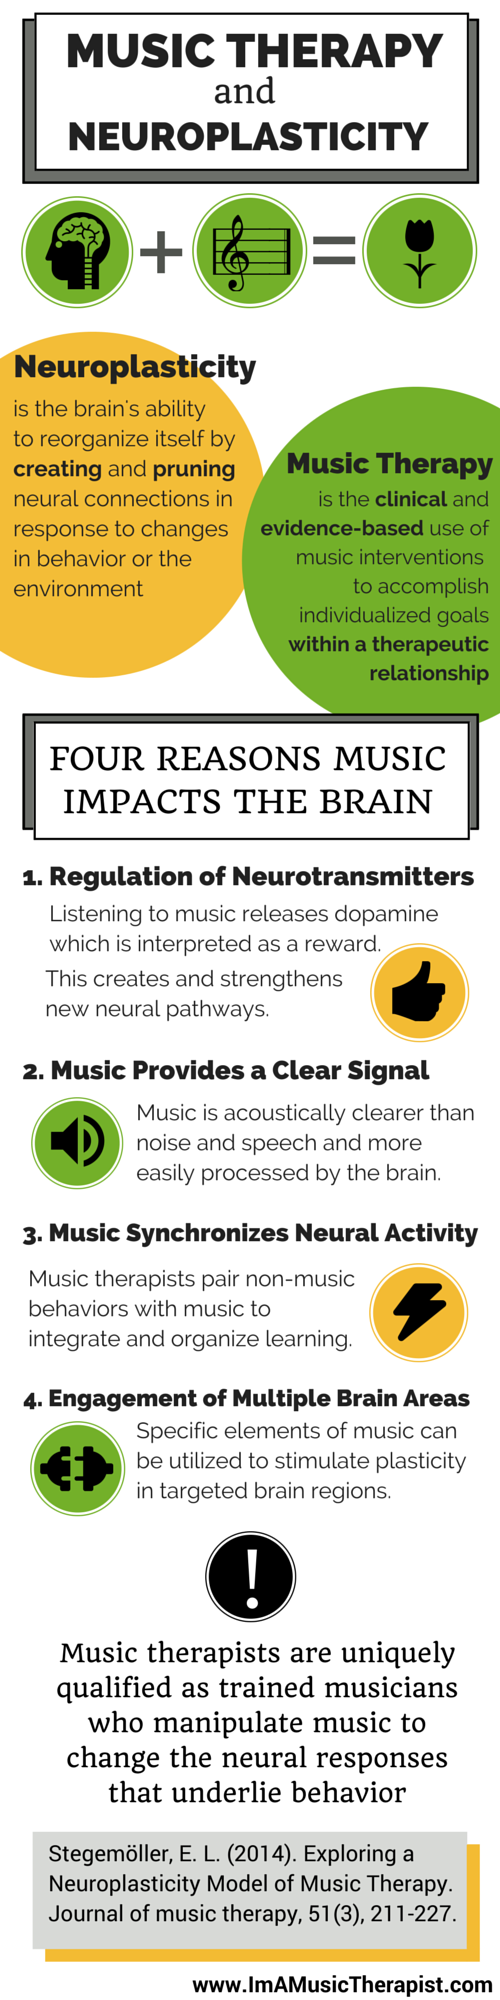 Music Therapy and Neuroplasticity Infographic